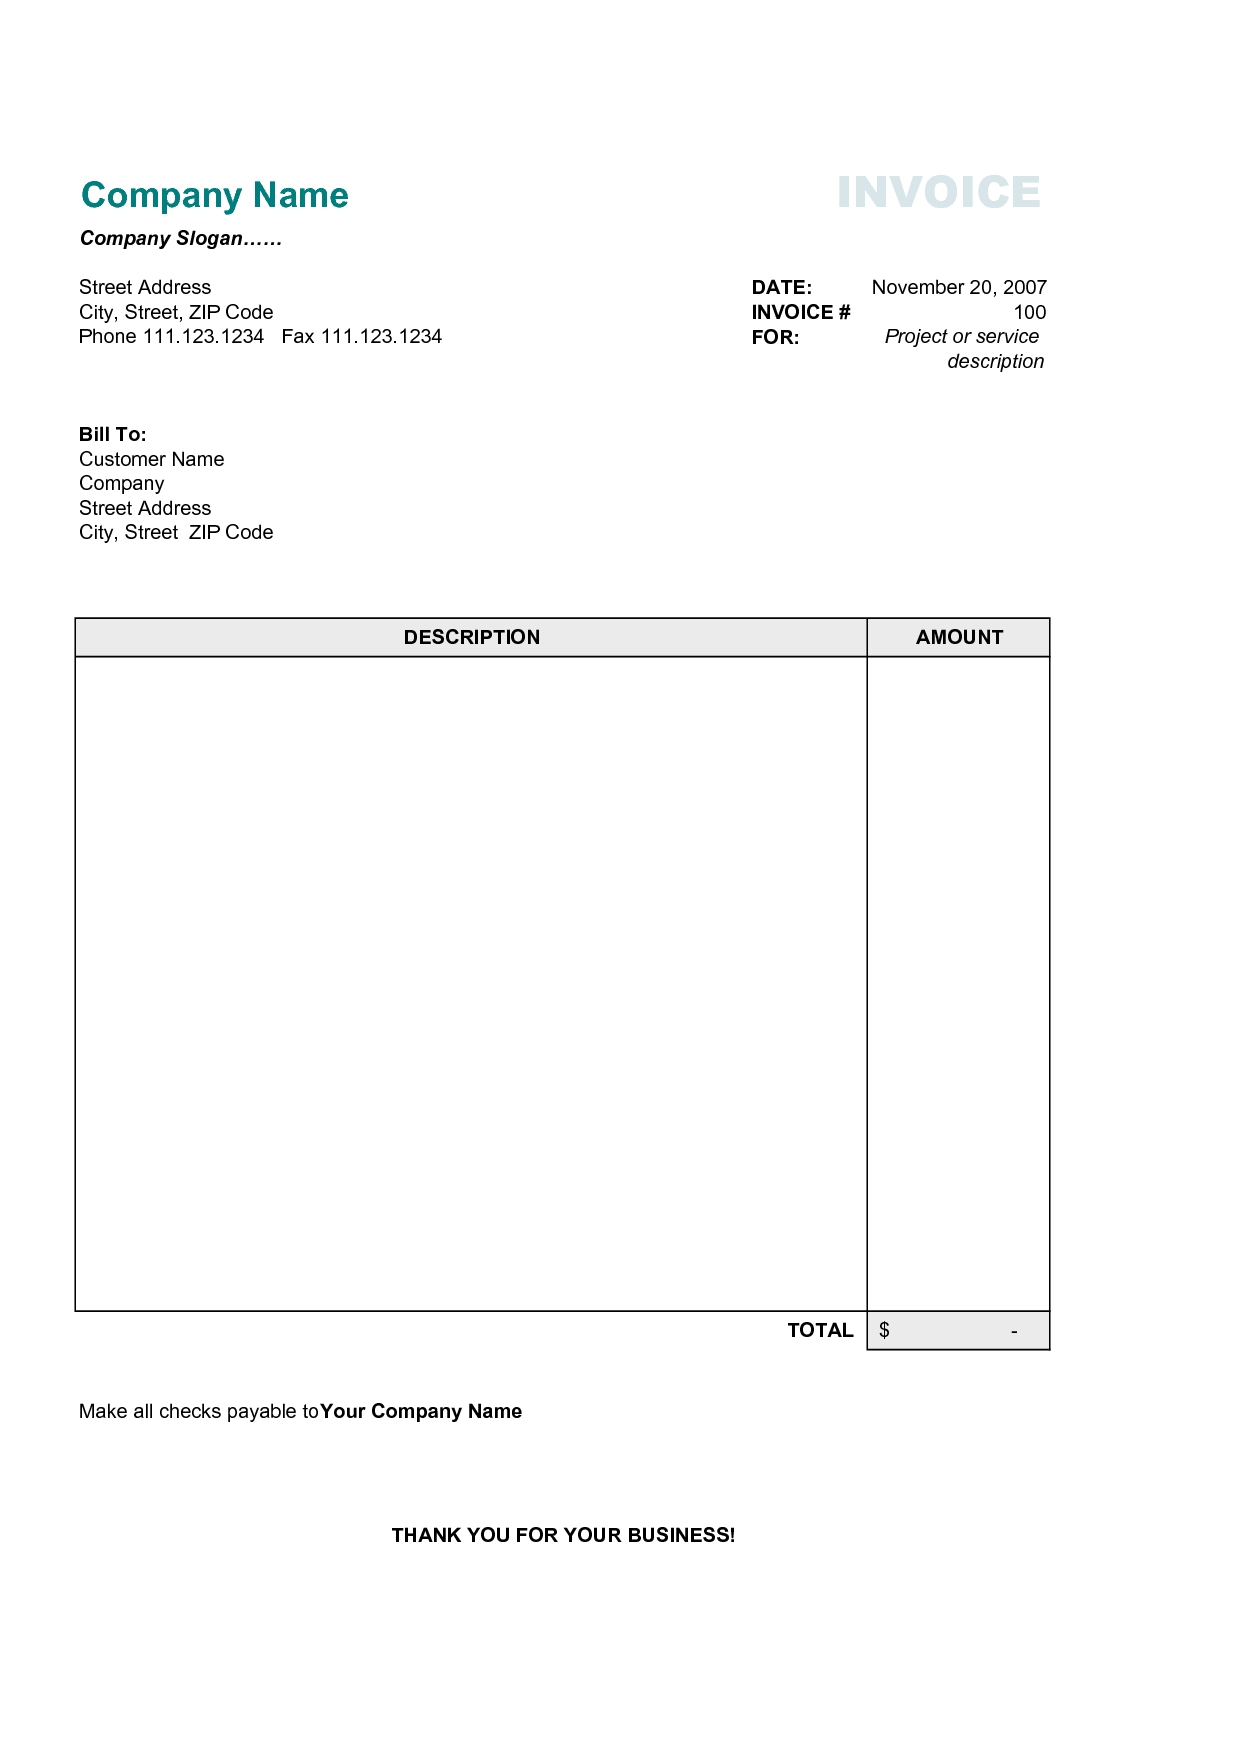 Standard Invoice Template Word